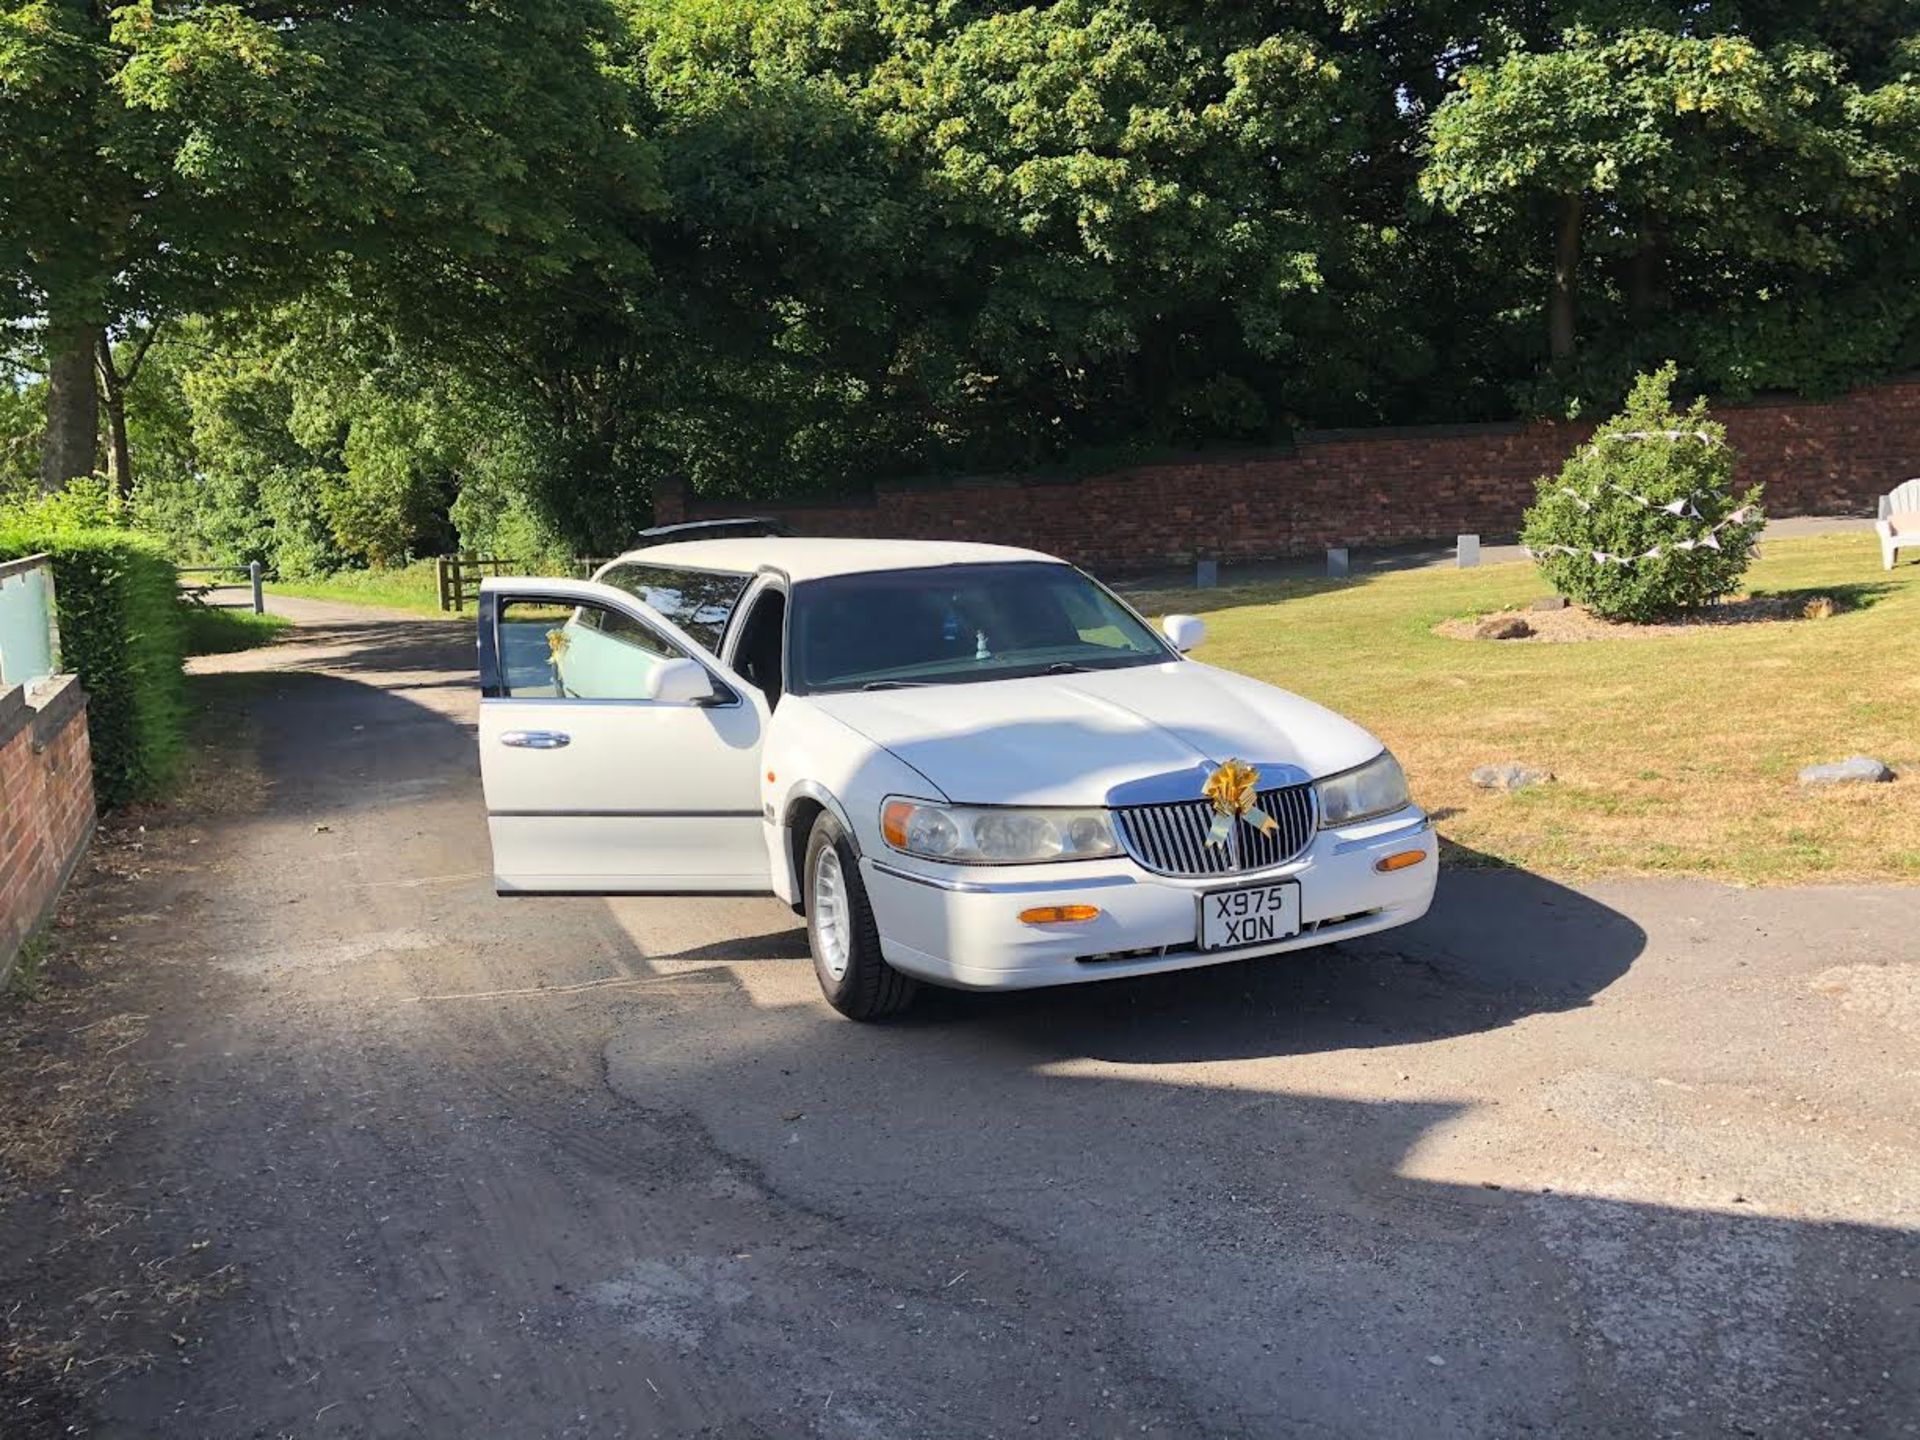 2001 LINCOLN TOWN CAR AUTO WHITE 10 SEATER LIMOUSINE WEDDING CAR *NO VAT* - Image 9 of 17